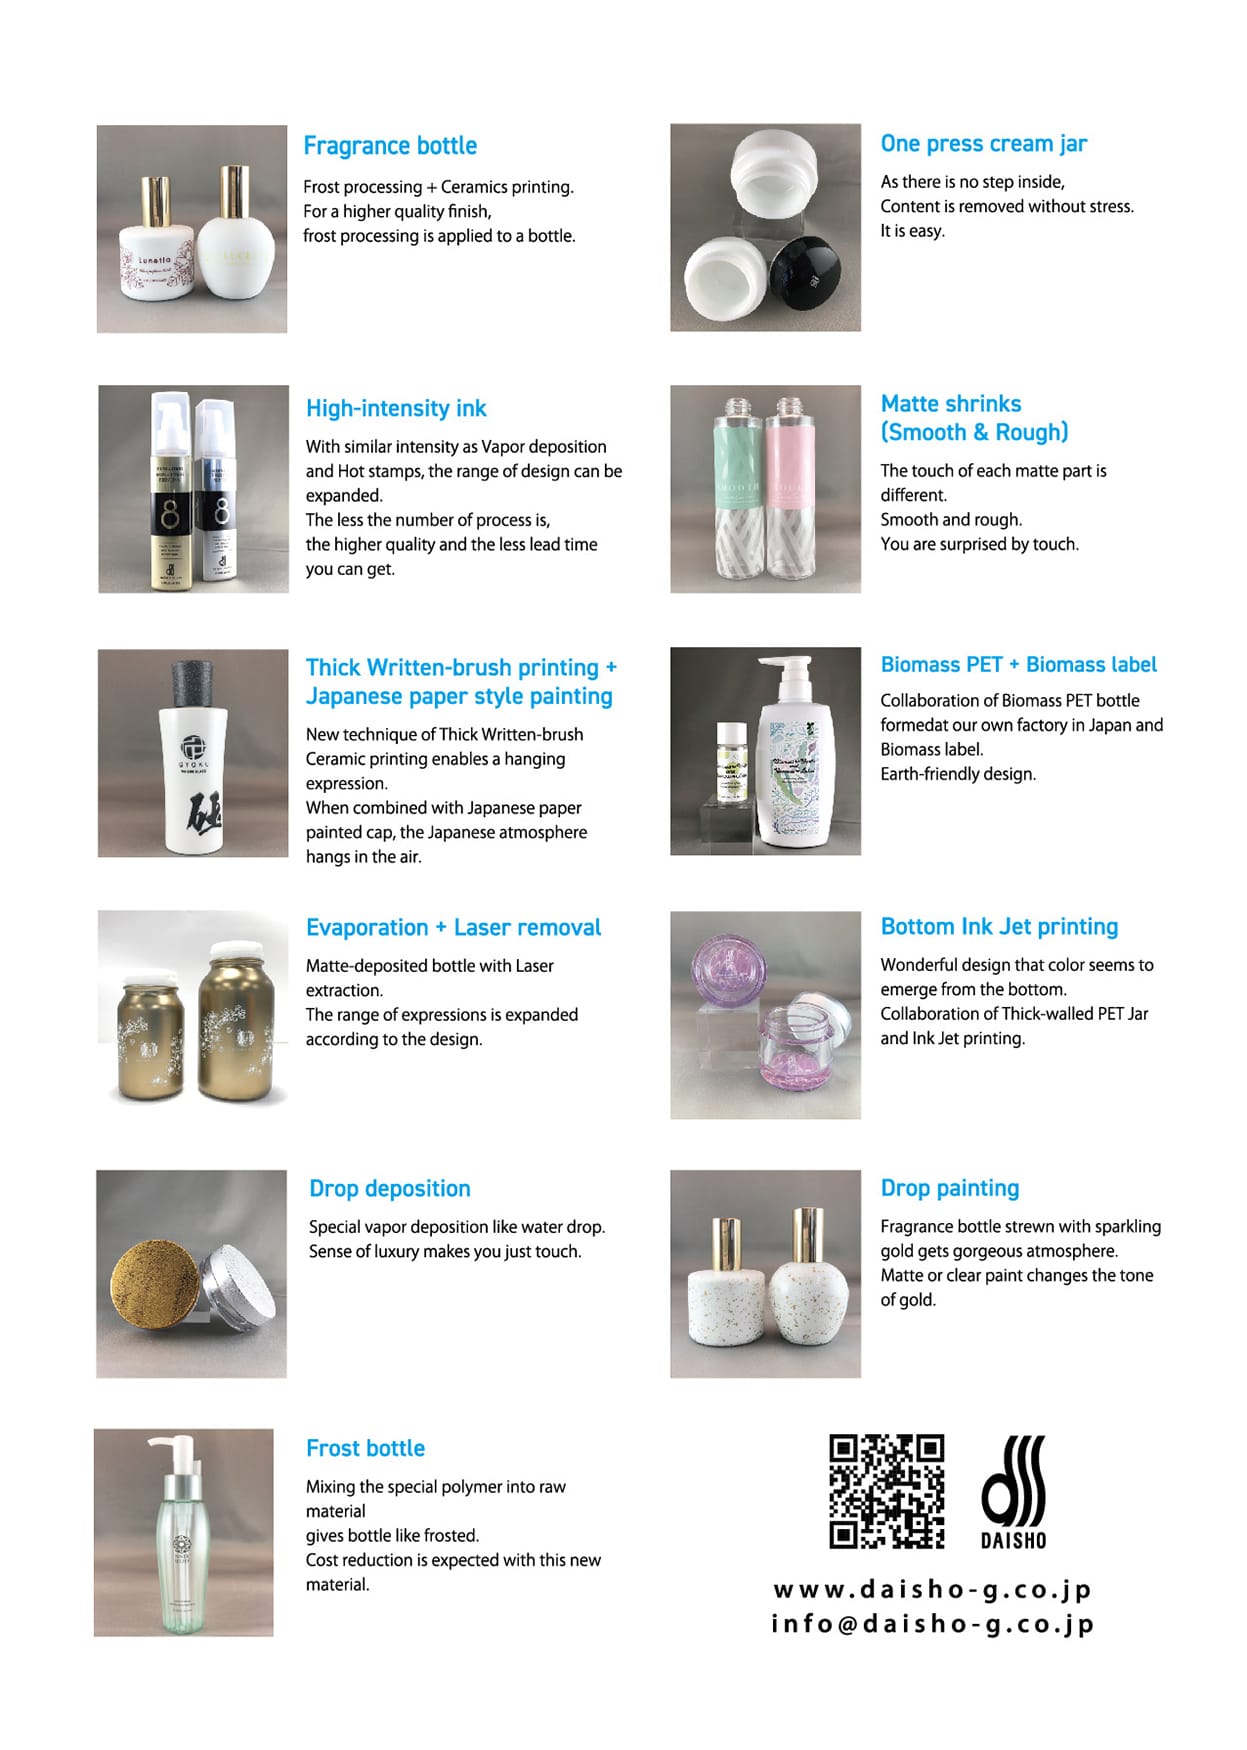 Products information